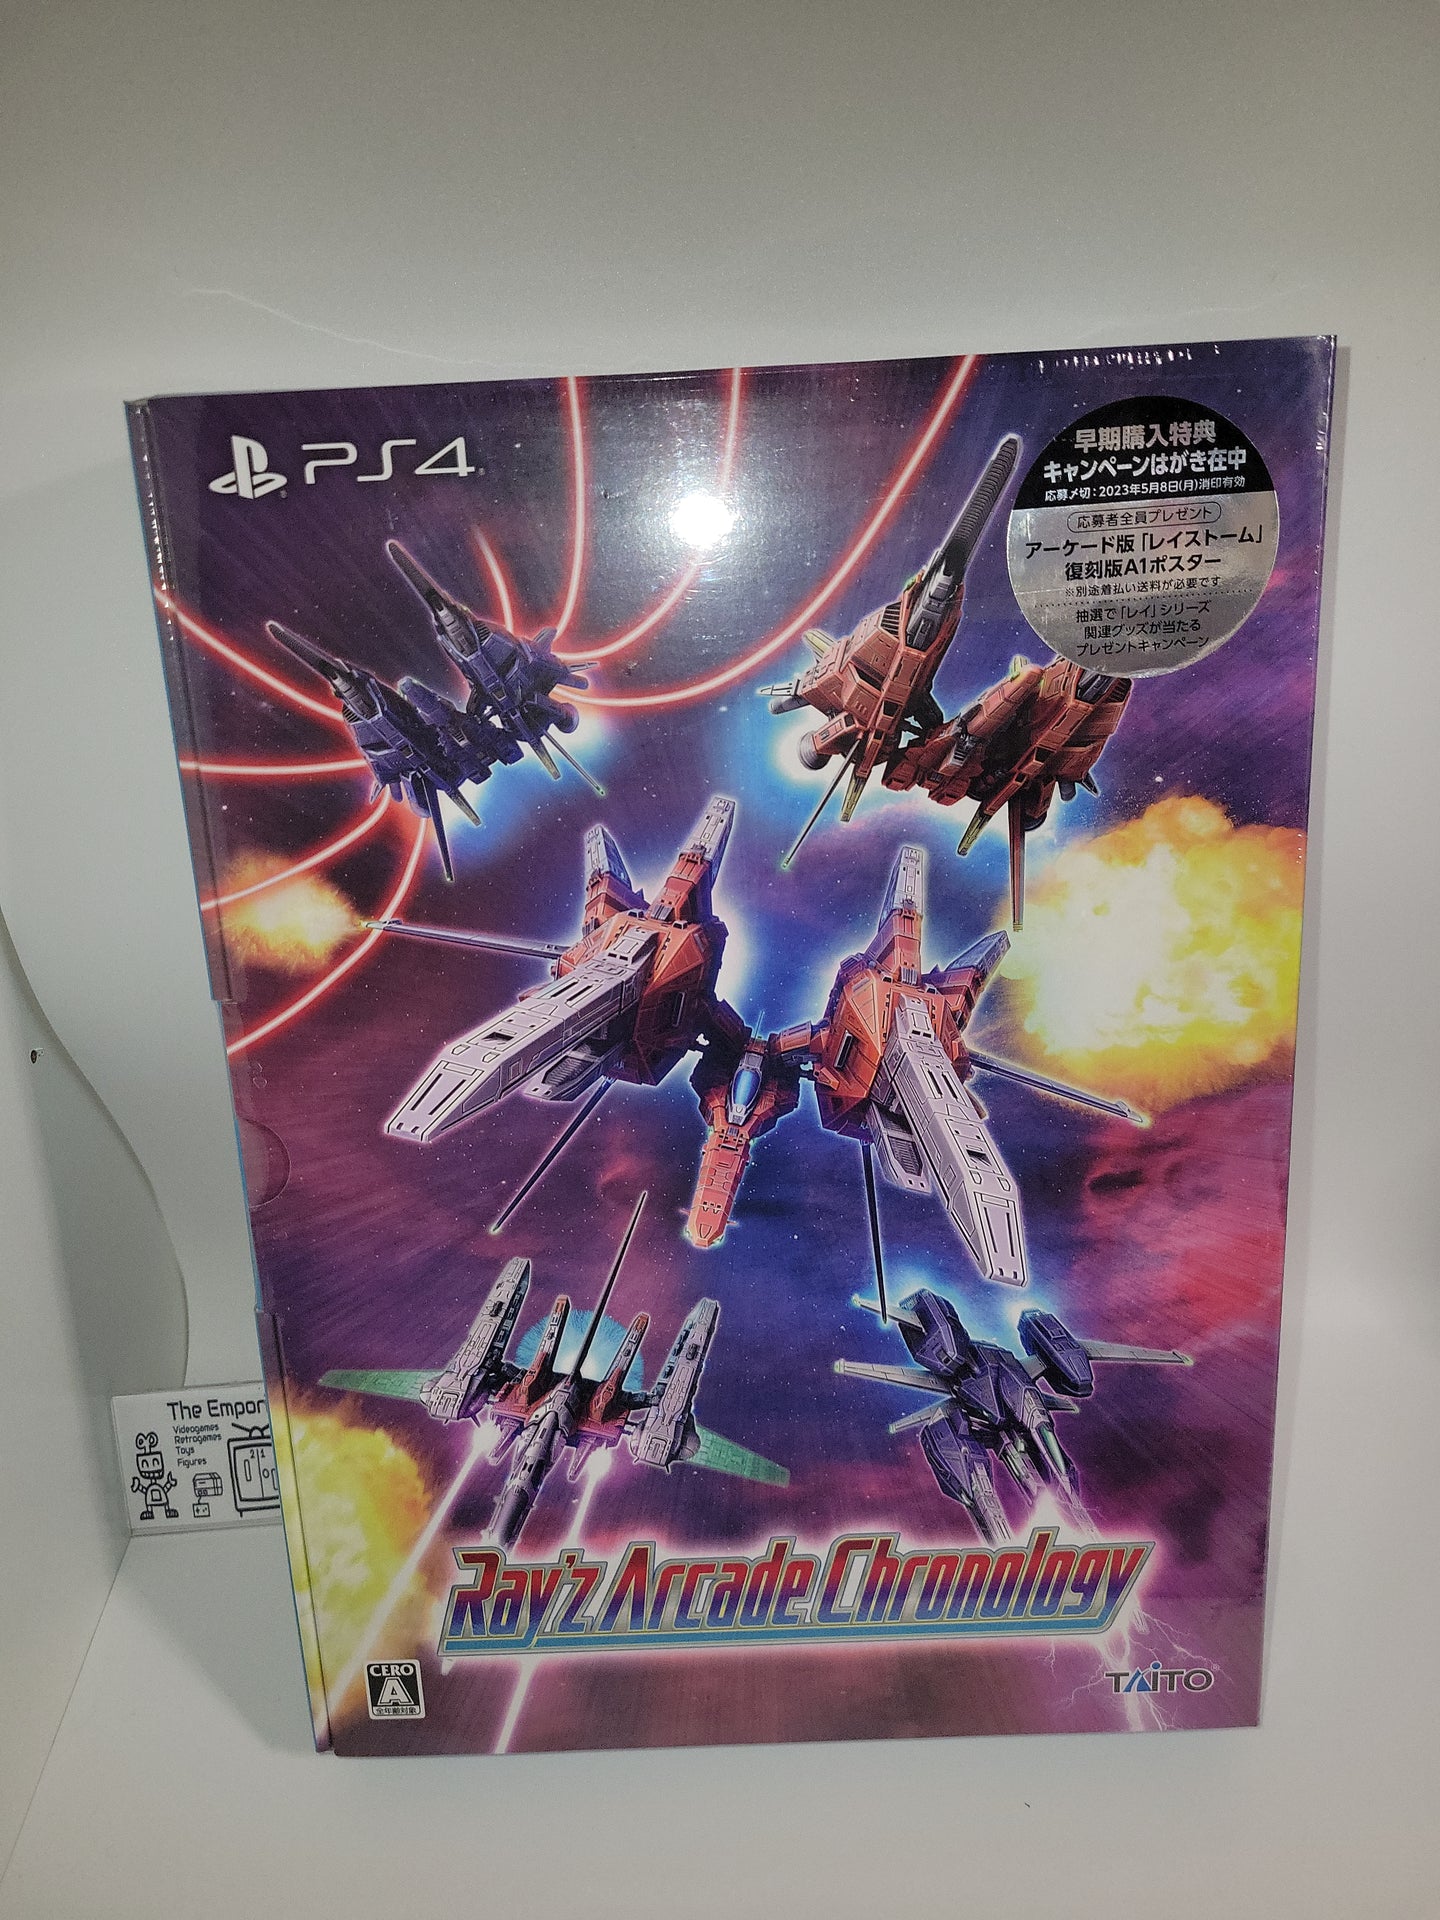 Ray’z Arcade Chronology Limited Edition - Sony PS4 Playstation 4